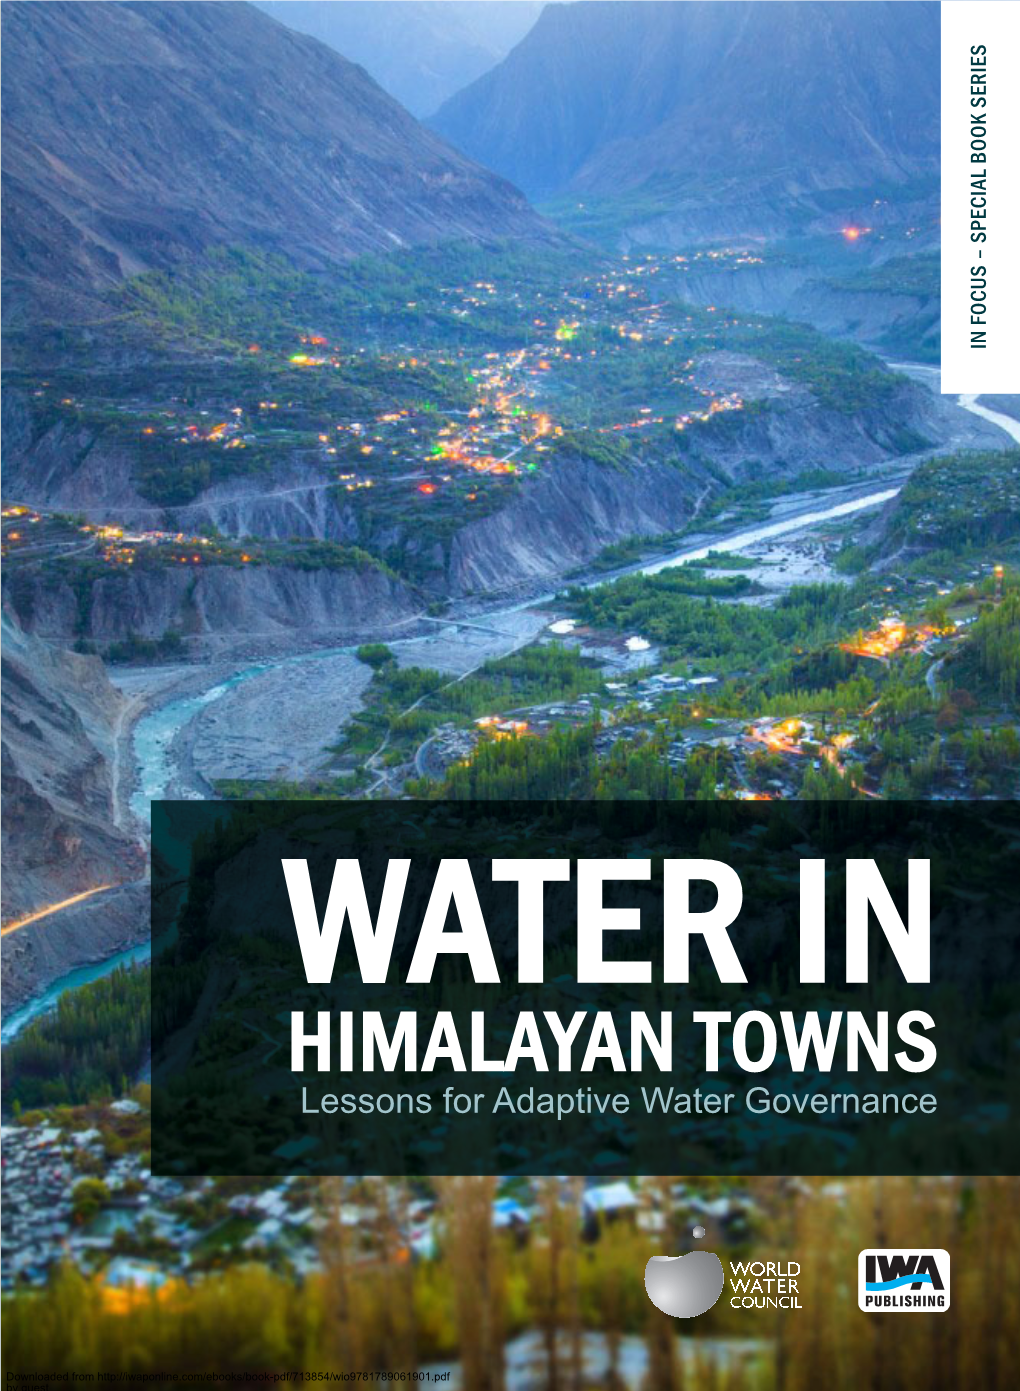 Water in Himalayan Towns